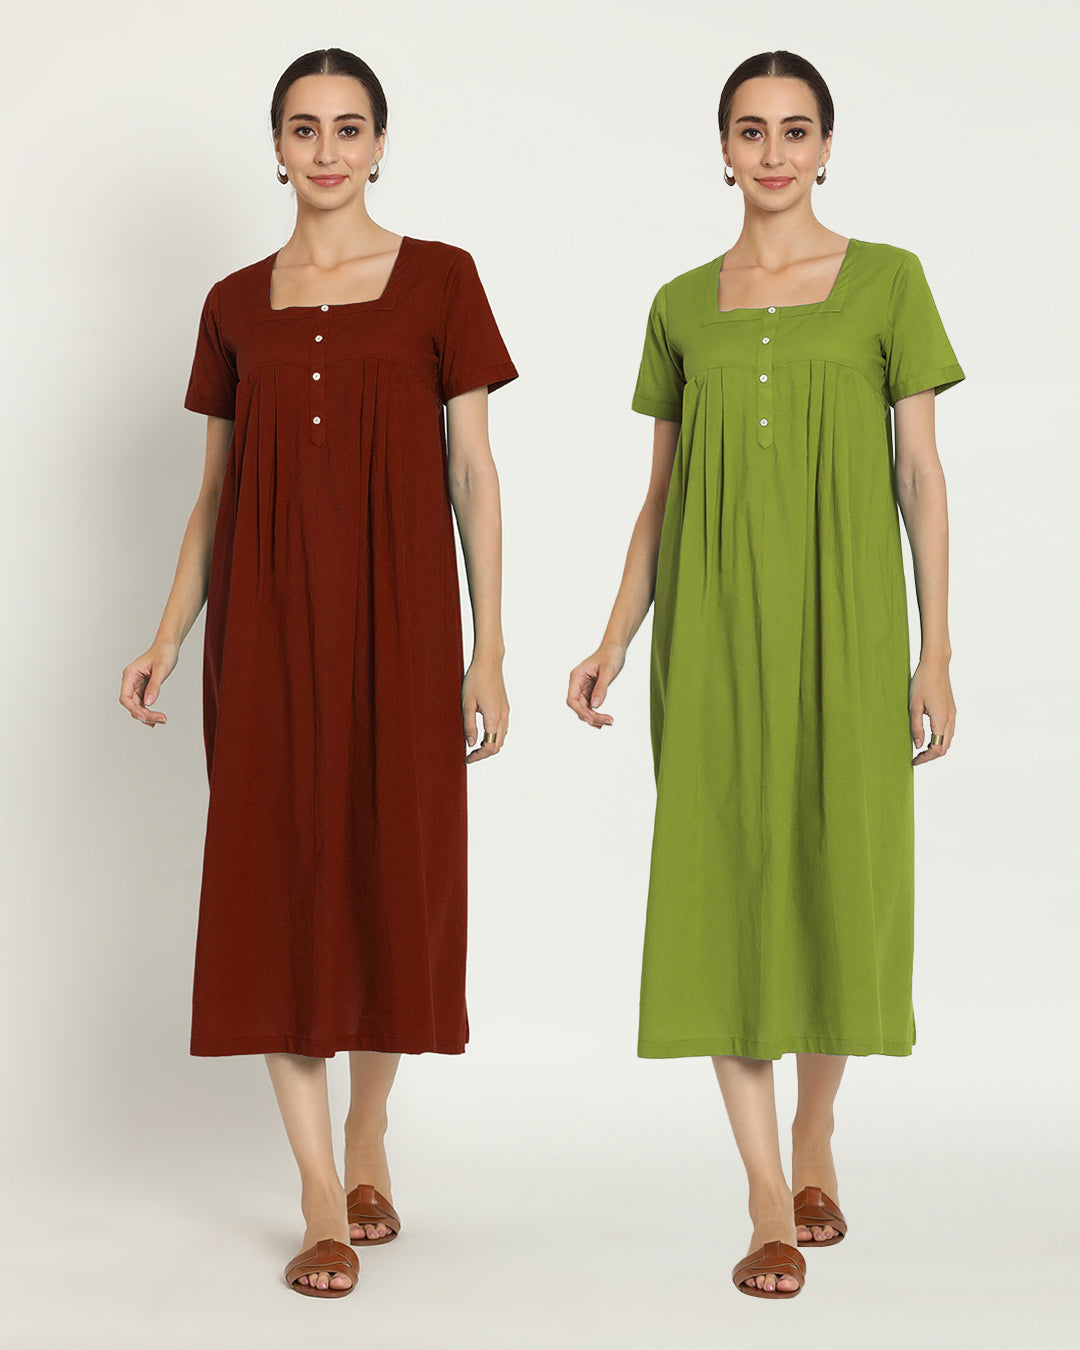 Combo: Russet Red & Sage Green Square Neck Serenity Nightdress- Set Of 2